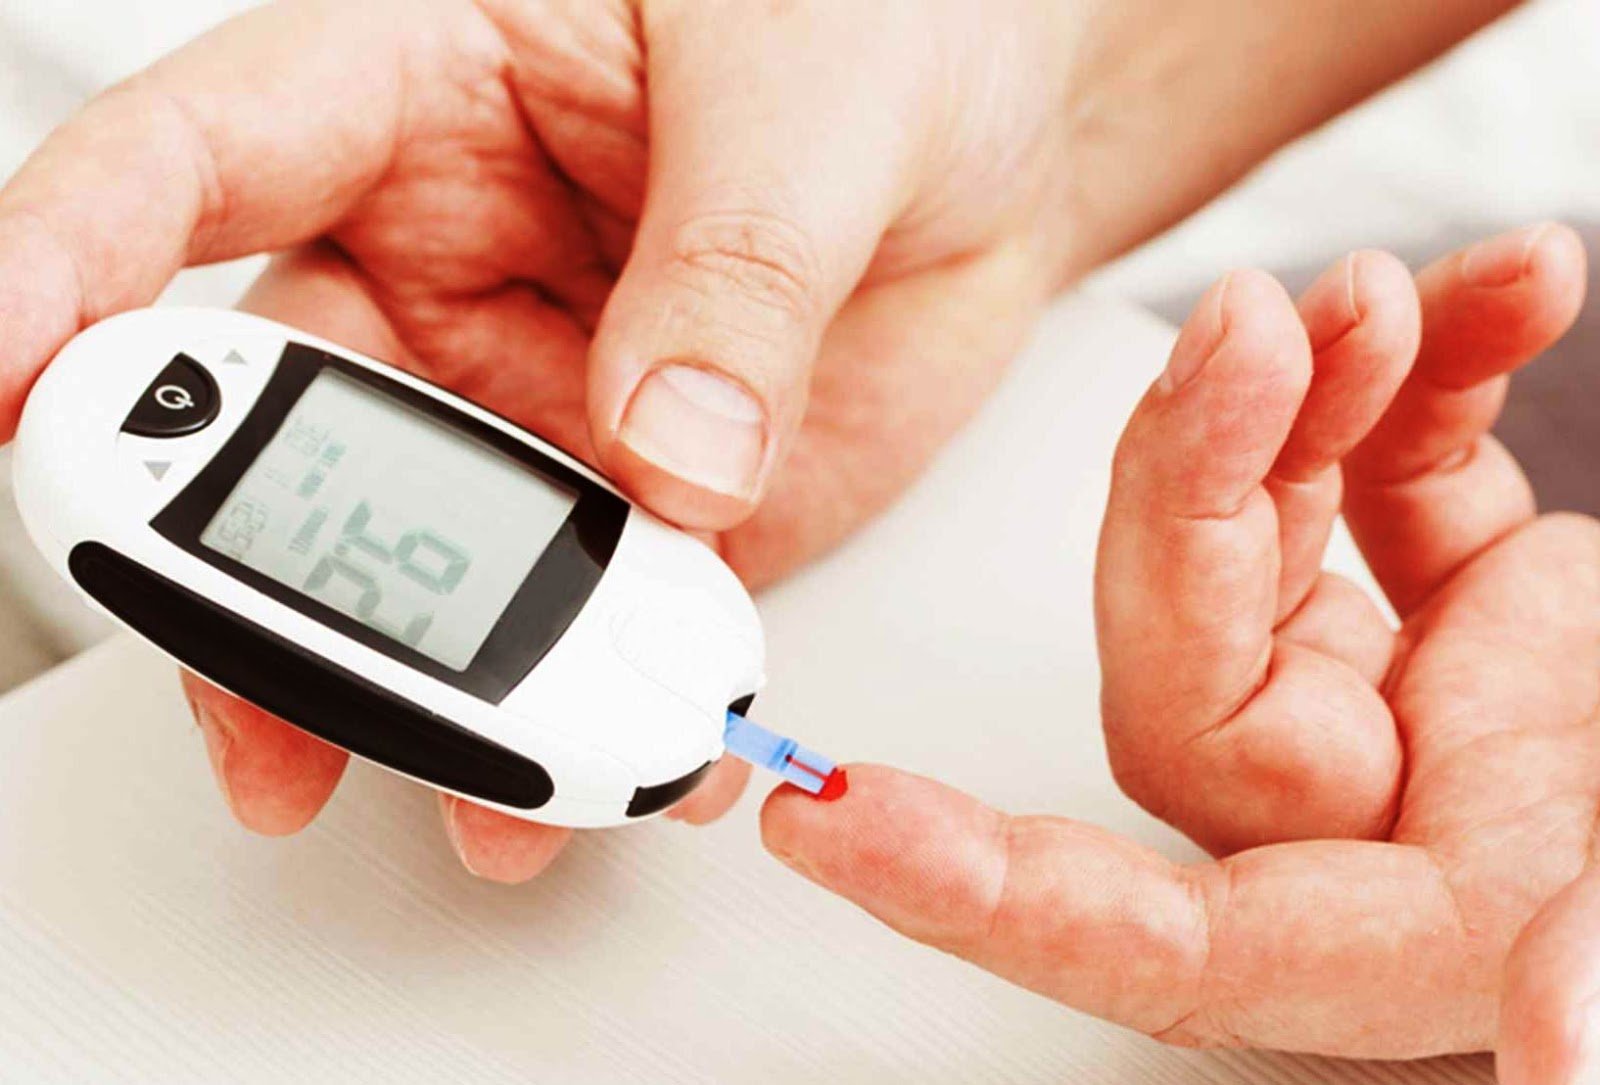 How to Lower Blood Sugar in 3 Days to Avoid Diabetes